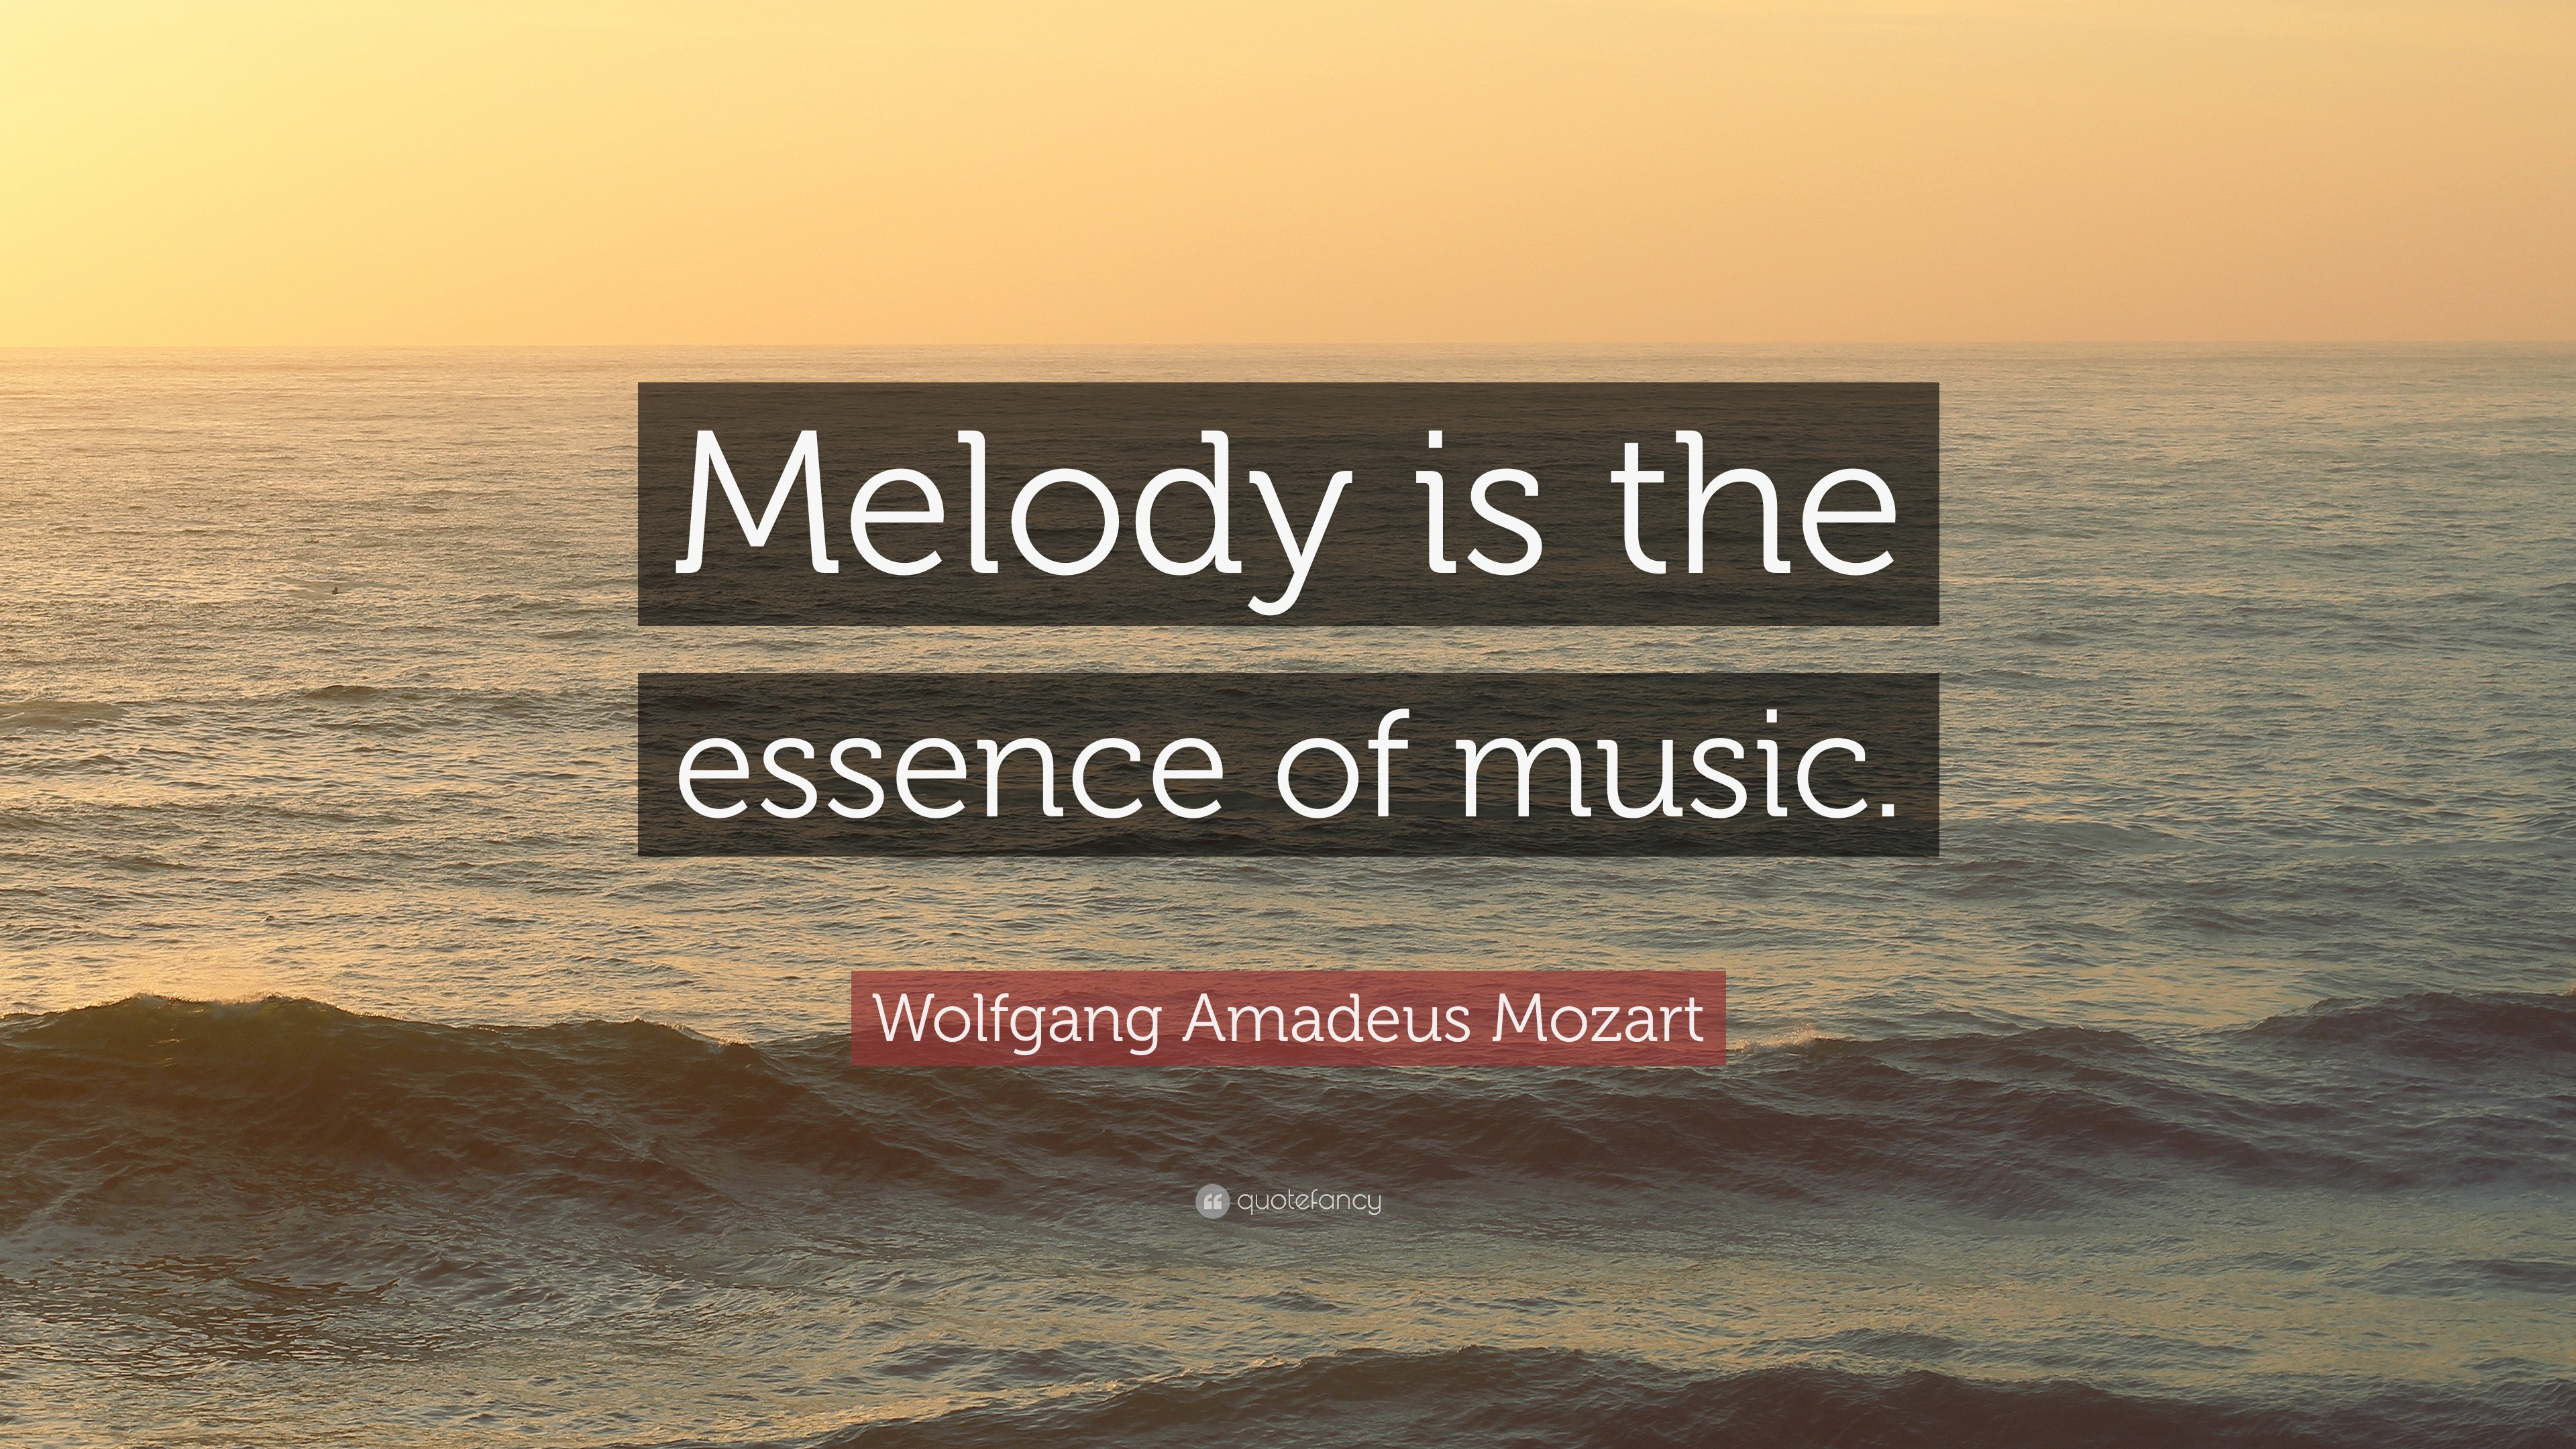 Wolfgang Amadeus Mozart Quote: “Melody is the essence of music.”